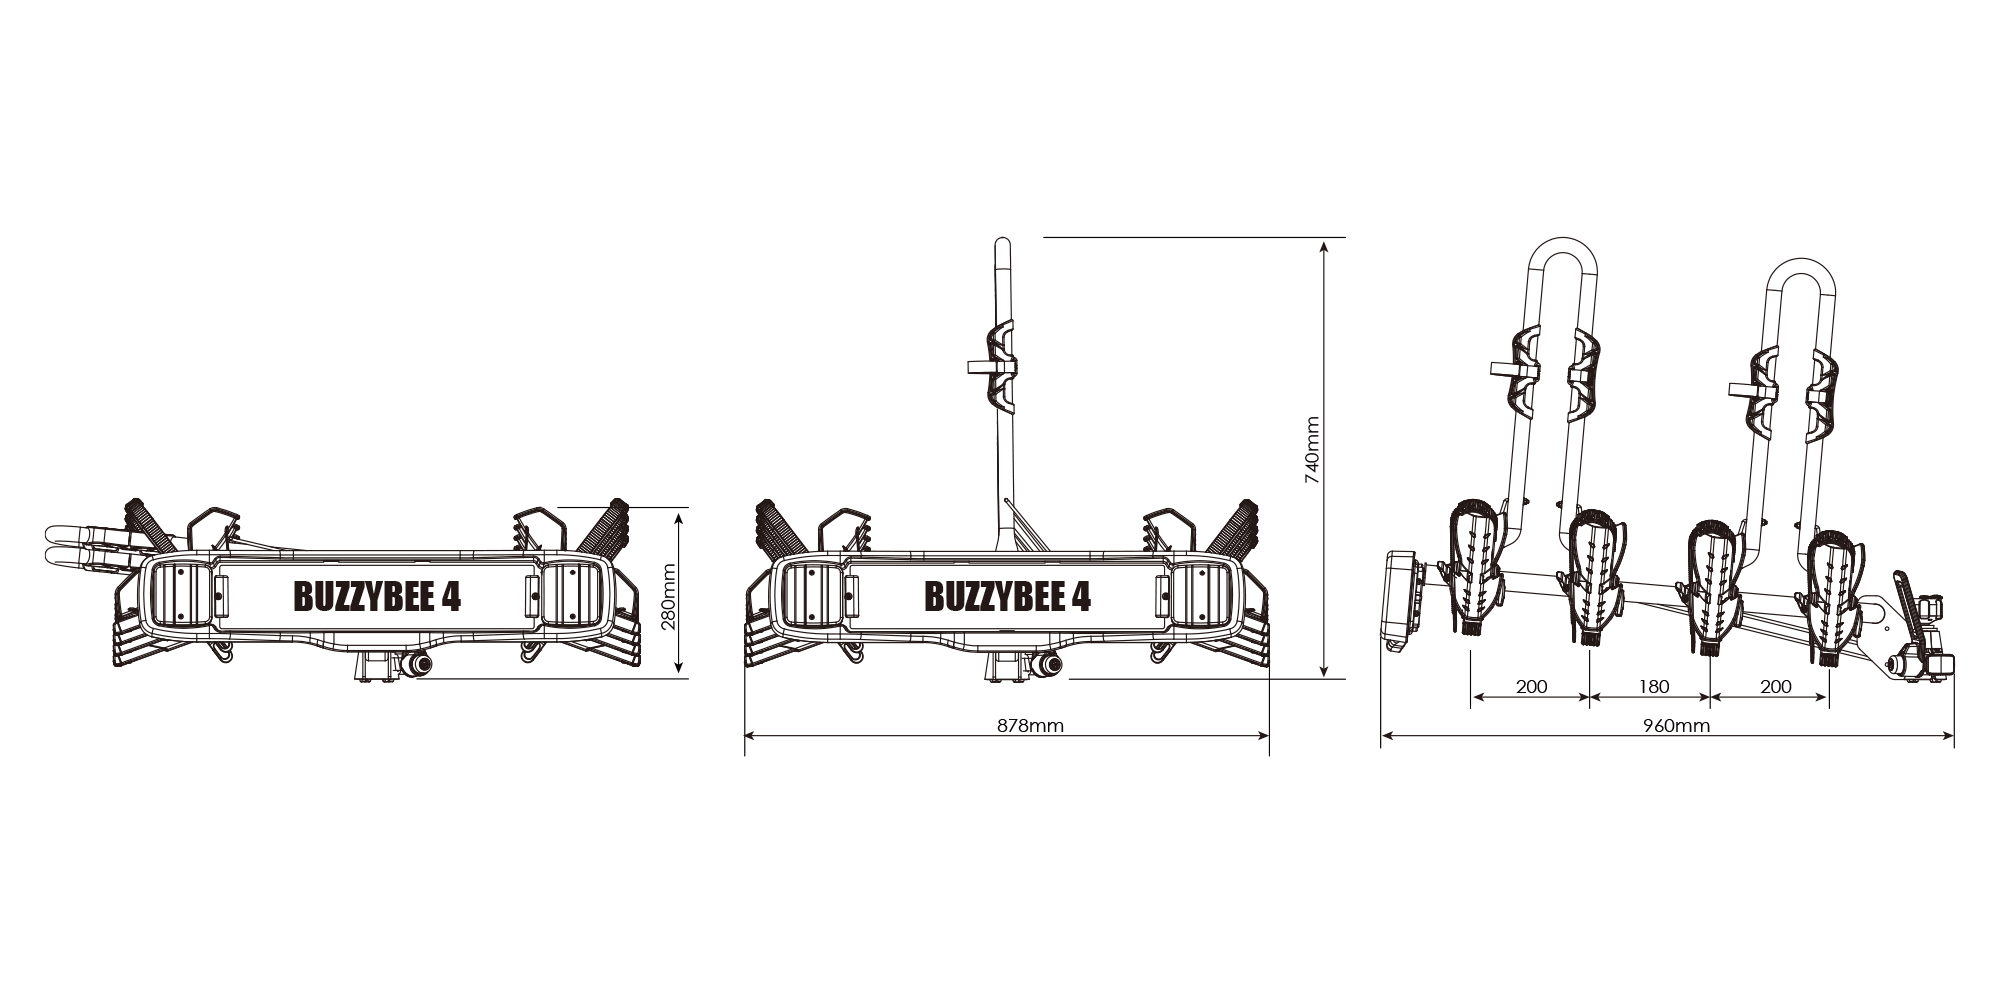 BUZZRACK Eazzy 4 technical specifications